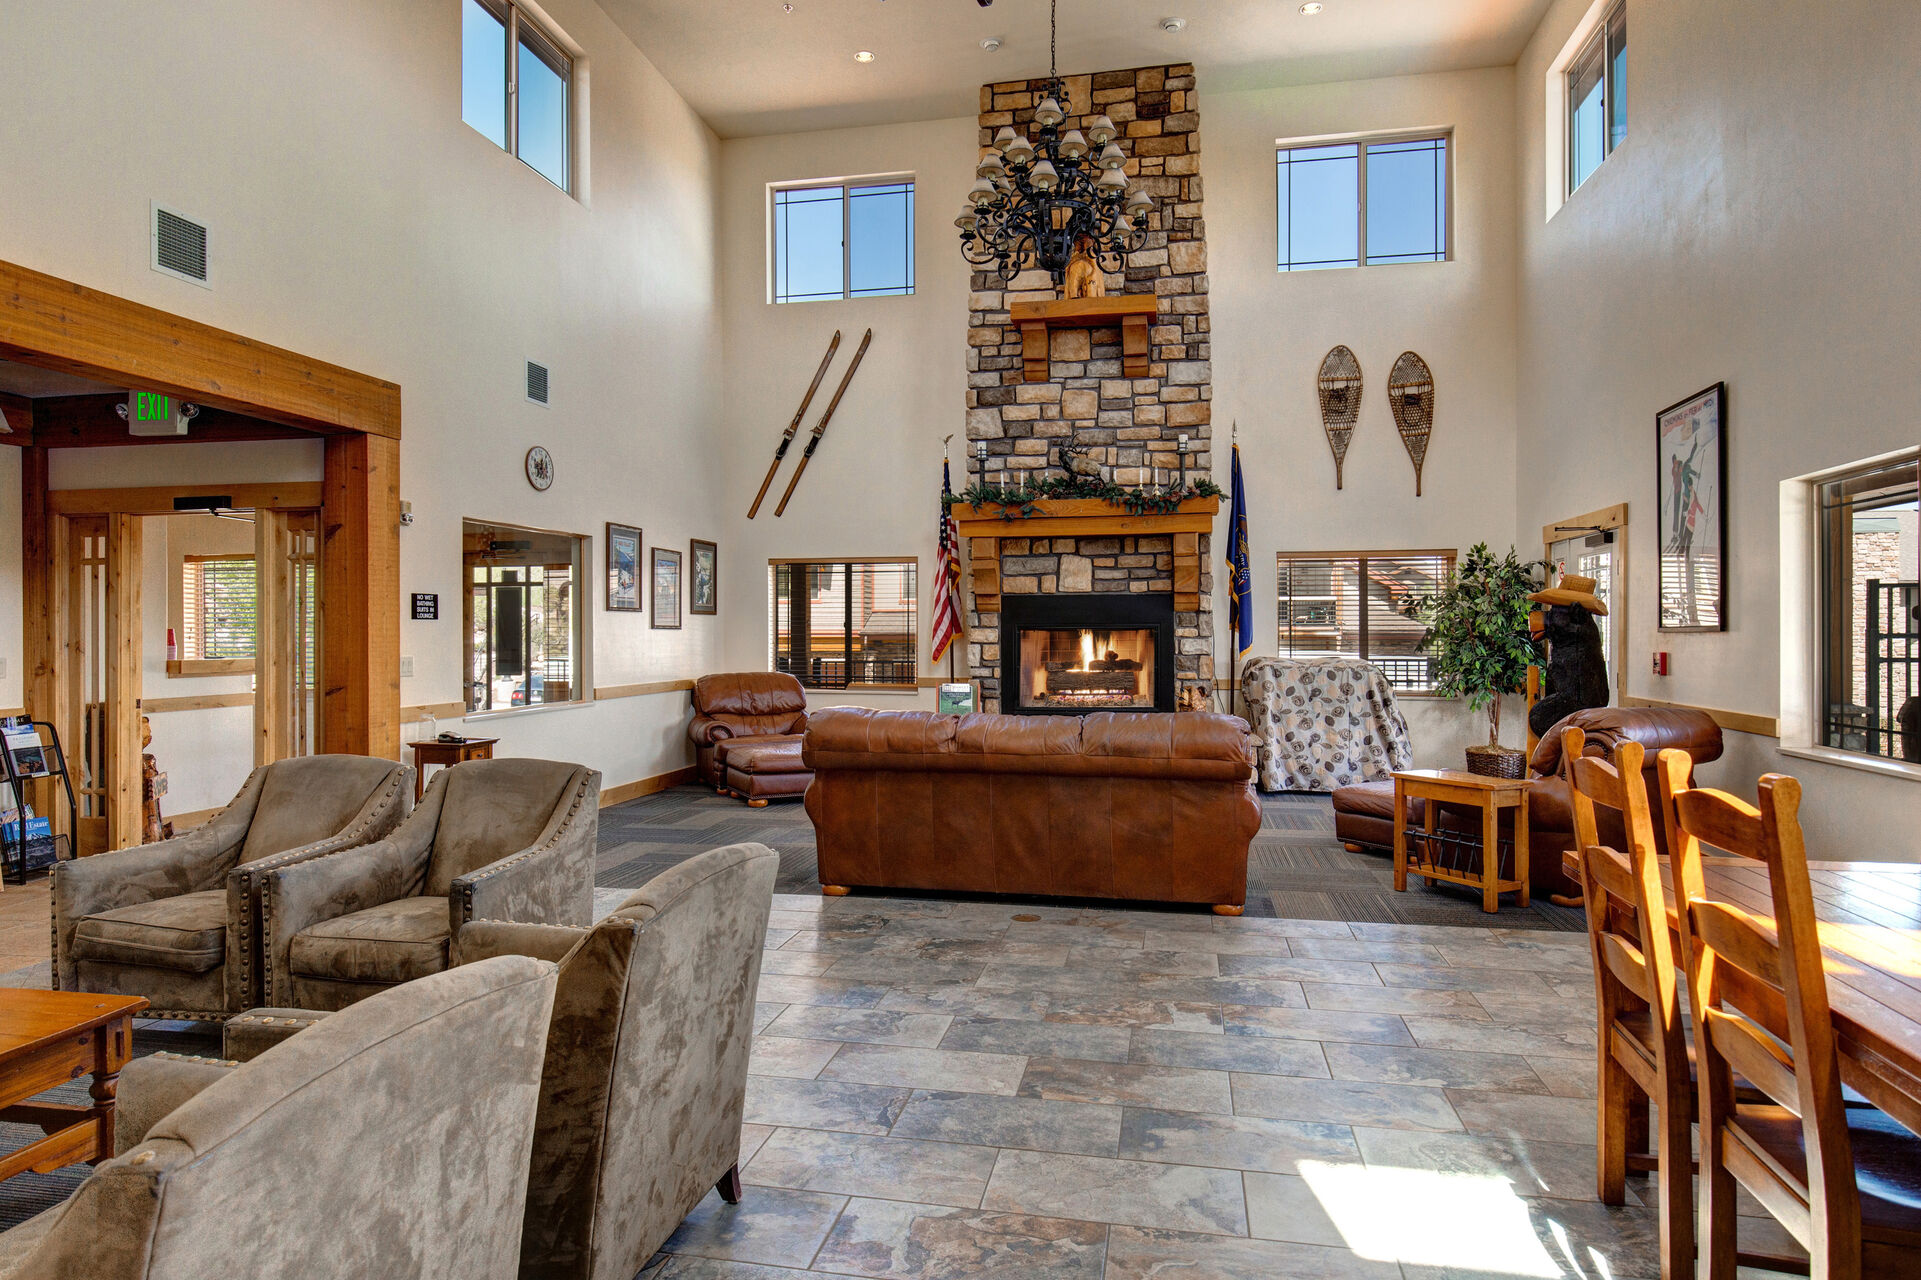 Bear Hollow Clubhouse with lobby/sitting area, seasonal pool, hot tub, and fitness center